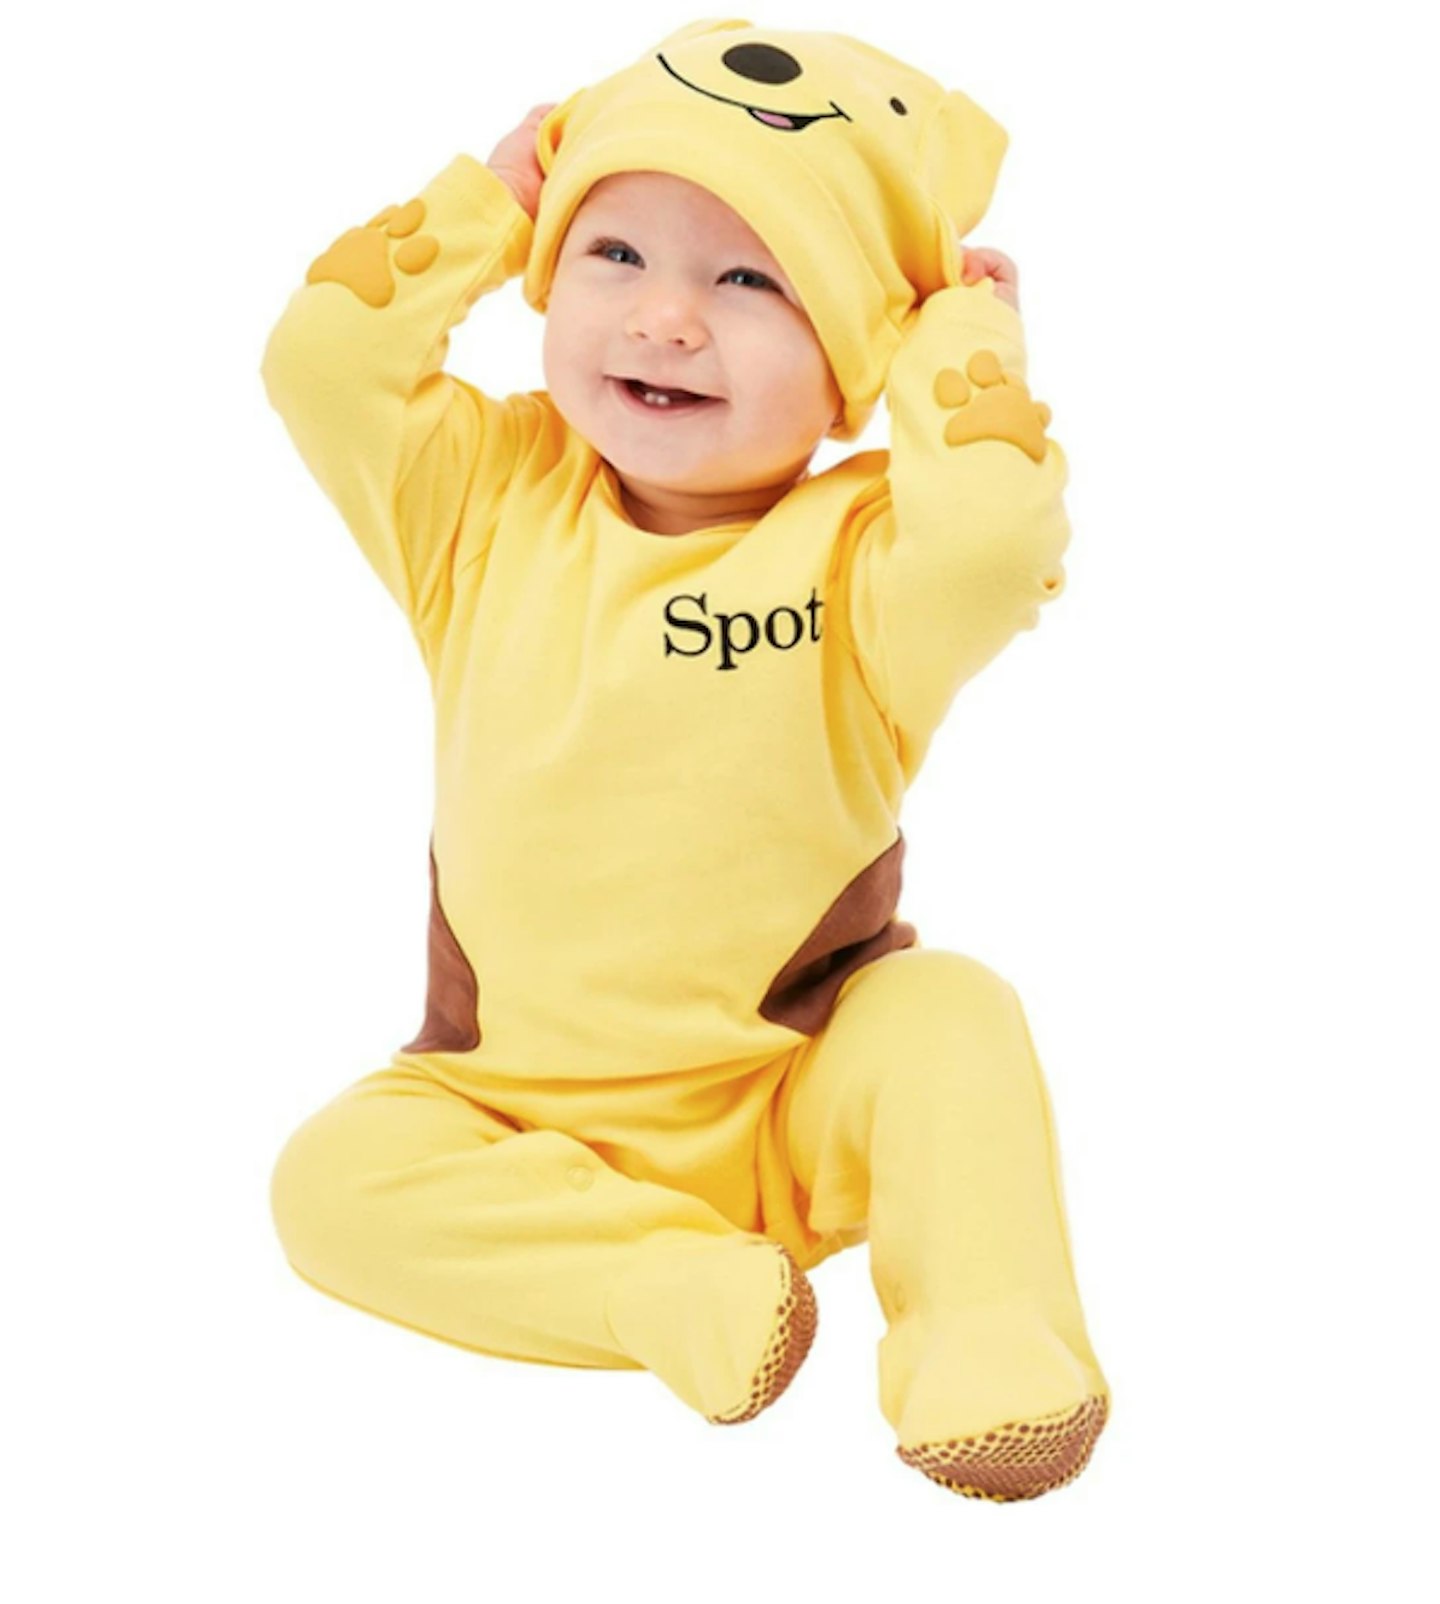 Spot the Dog baby costume